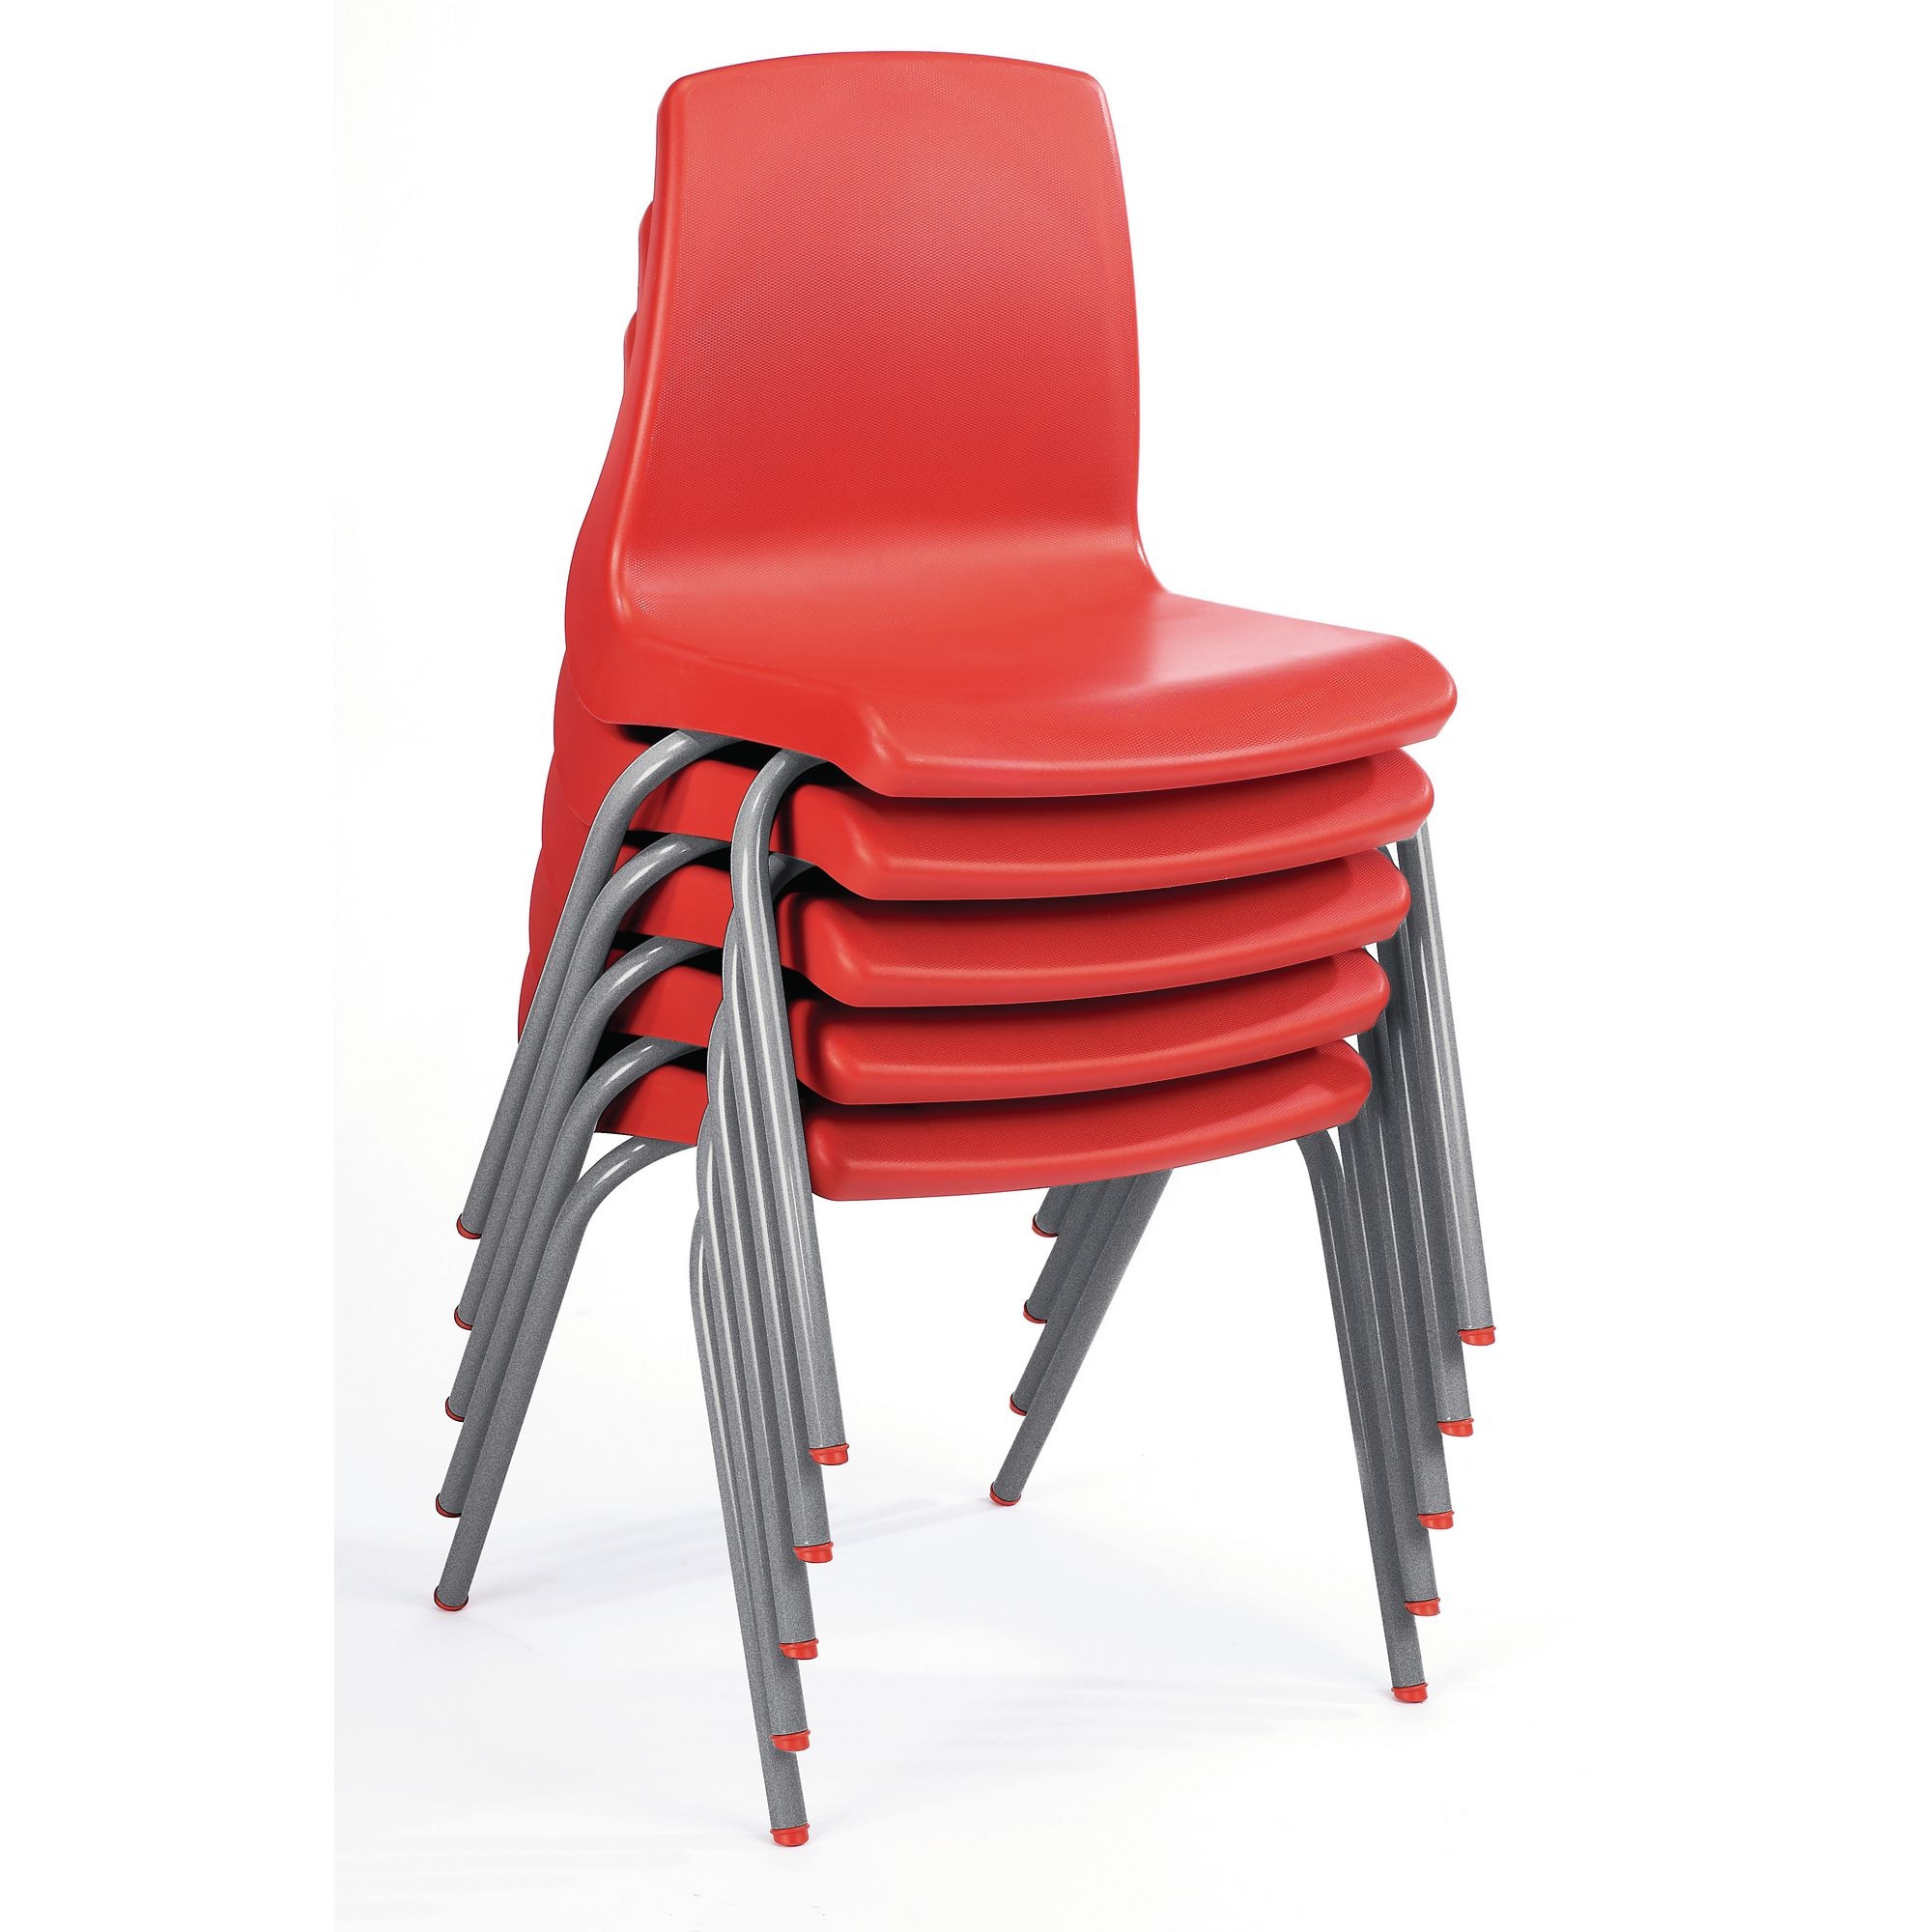 NP Chair Class Packs - Red - Seat height: 350mm